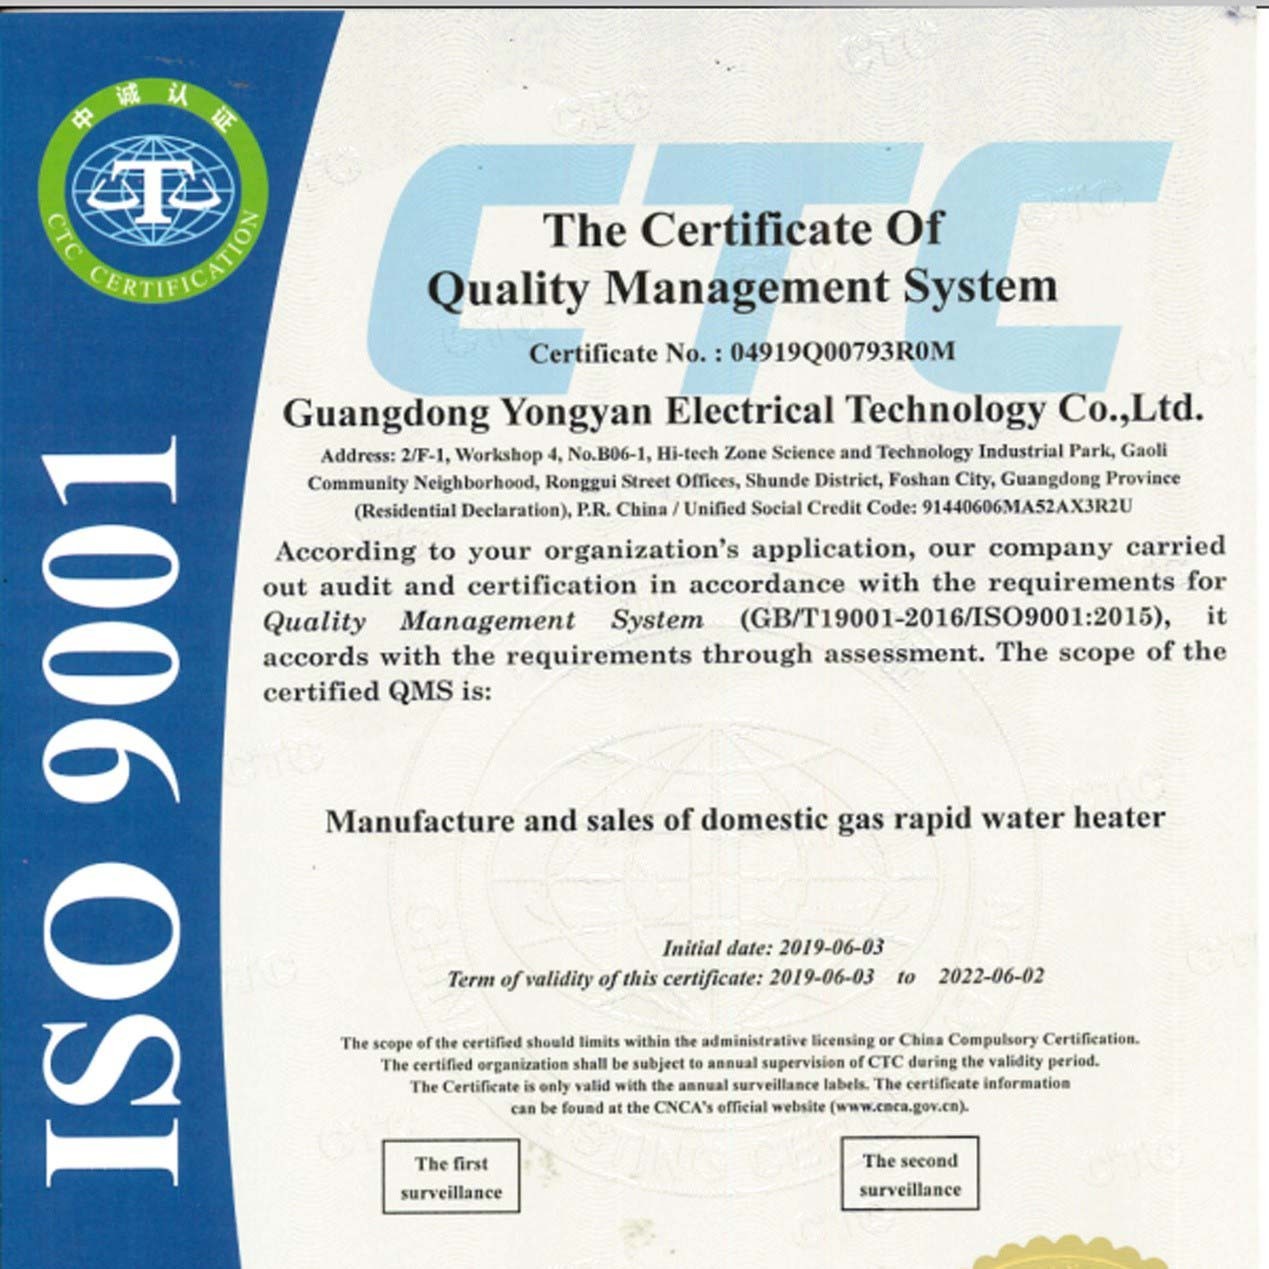 Upgrated Greaidea water heater factory successfully passed ISO9001:2015 at new location